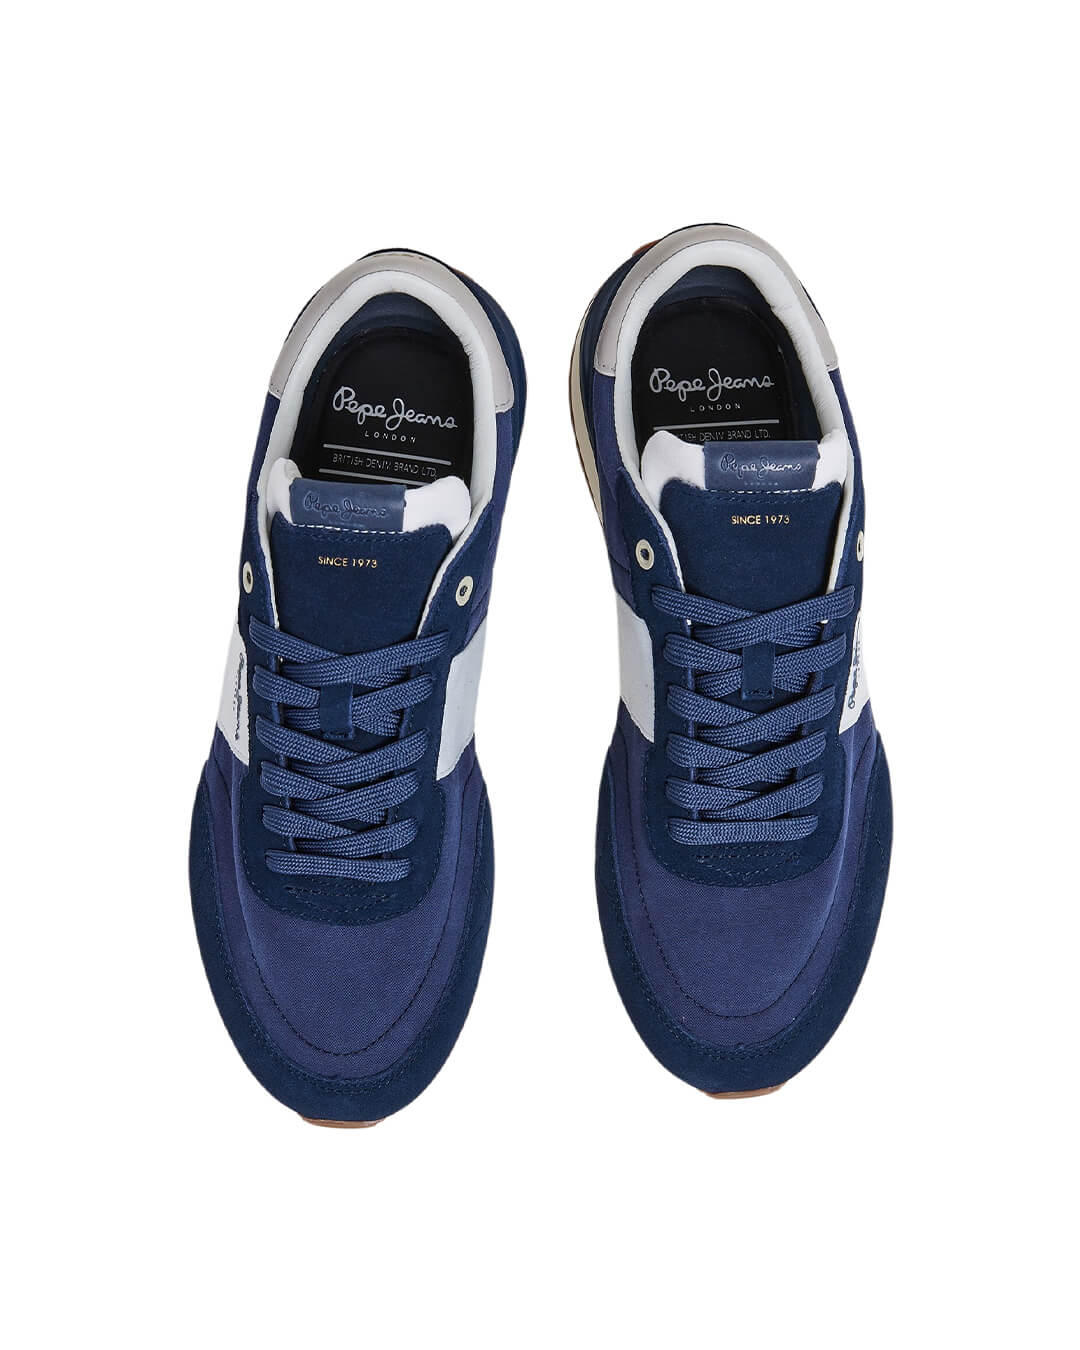 Pepe Jeans Shoes Pepe Jeans Navy Combined Trainers